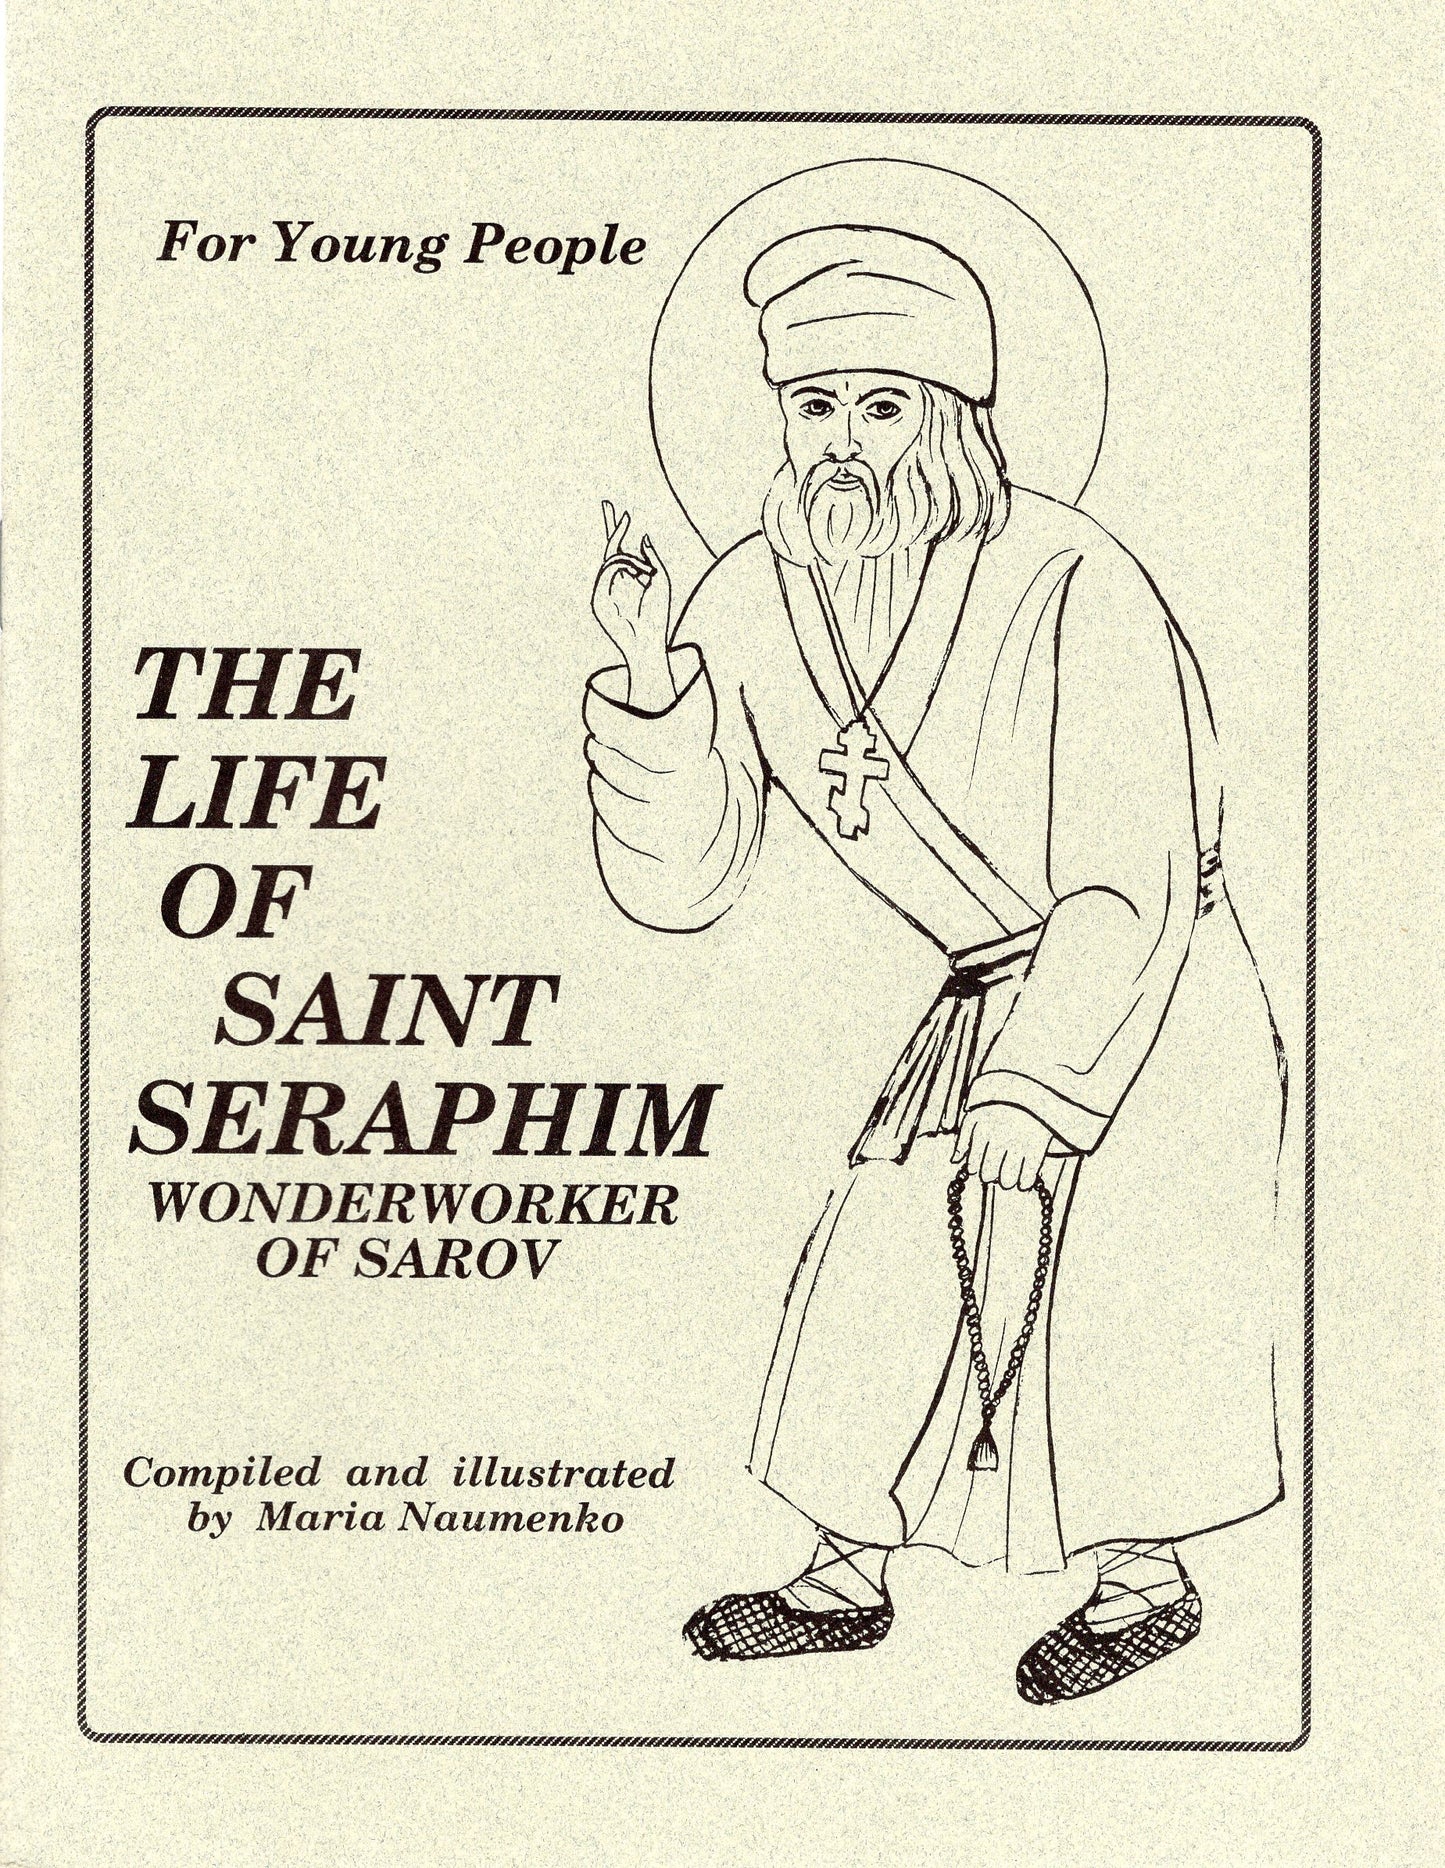 The Life of Saint Seraphim Wonderworker of Sarov for Young People